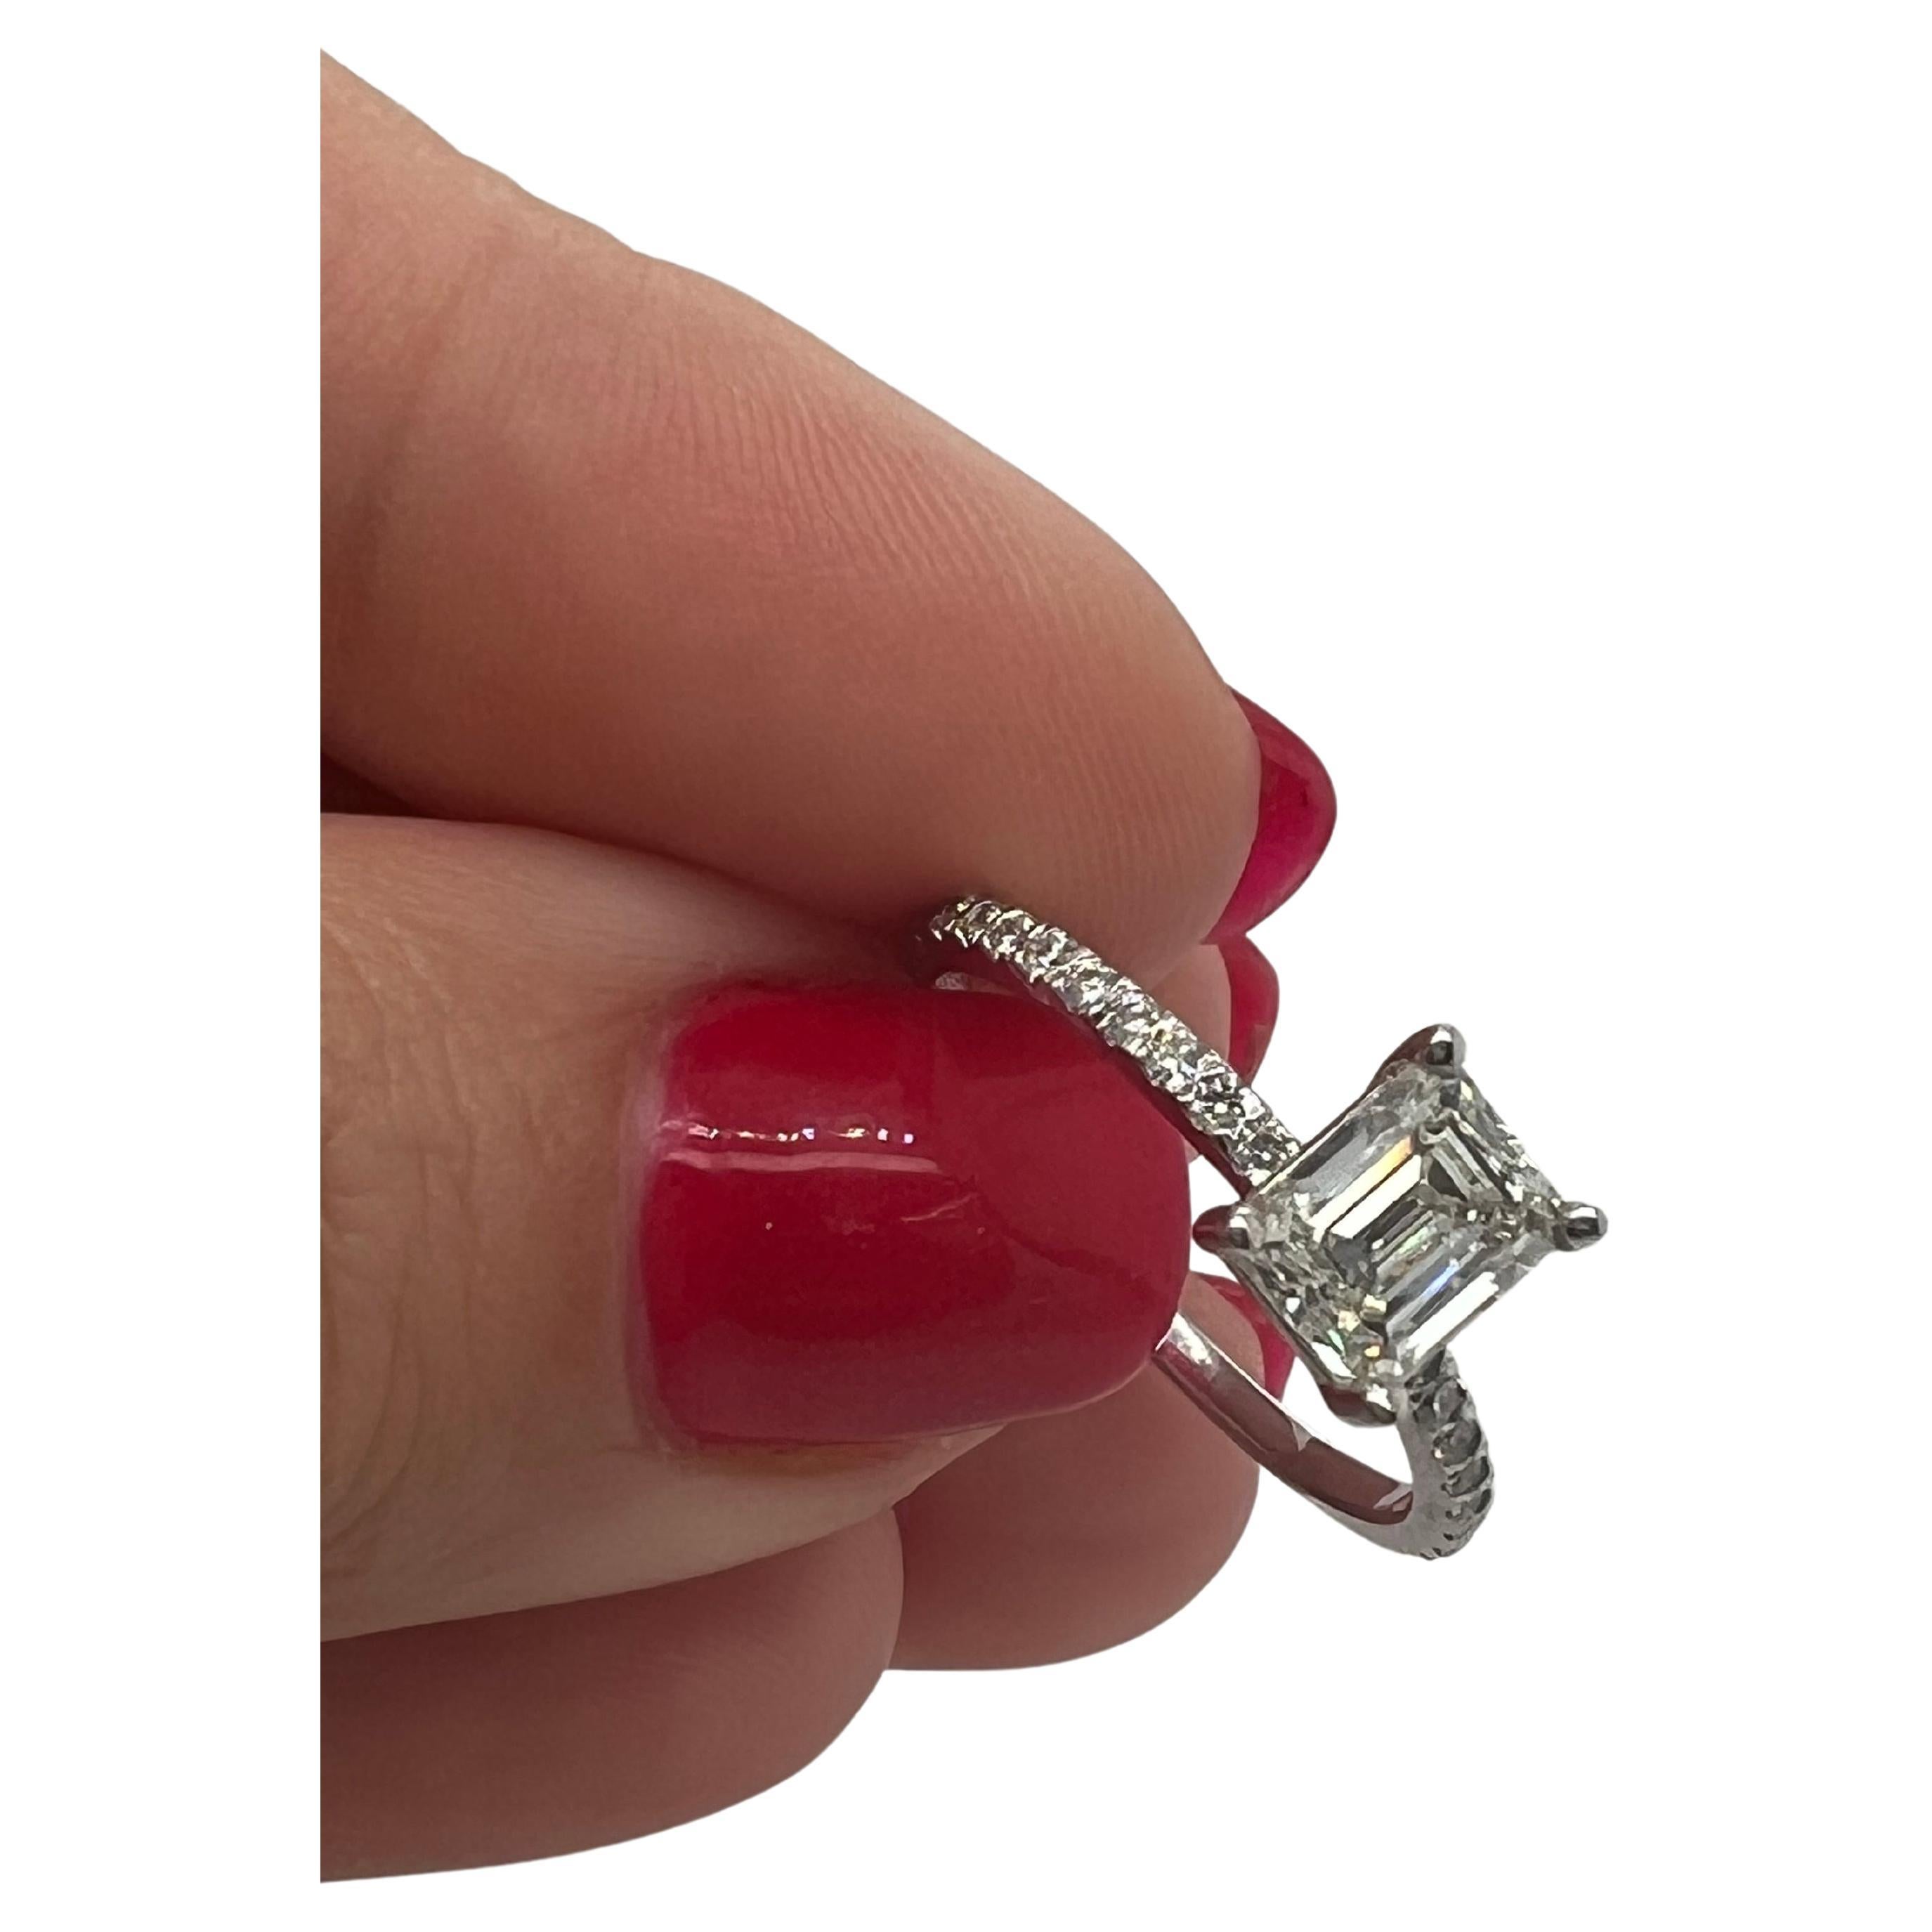 This exquisite engagement ring features a stunning 1.05-carat natural earth mined Emerald Cut diamond in J-K color and VS1 clarity, set in a 4-prong basket on a 1.80mm wide solid 18kt white gold shank with 0.24 carats total weight of natural earth